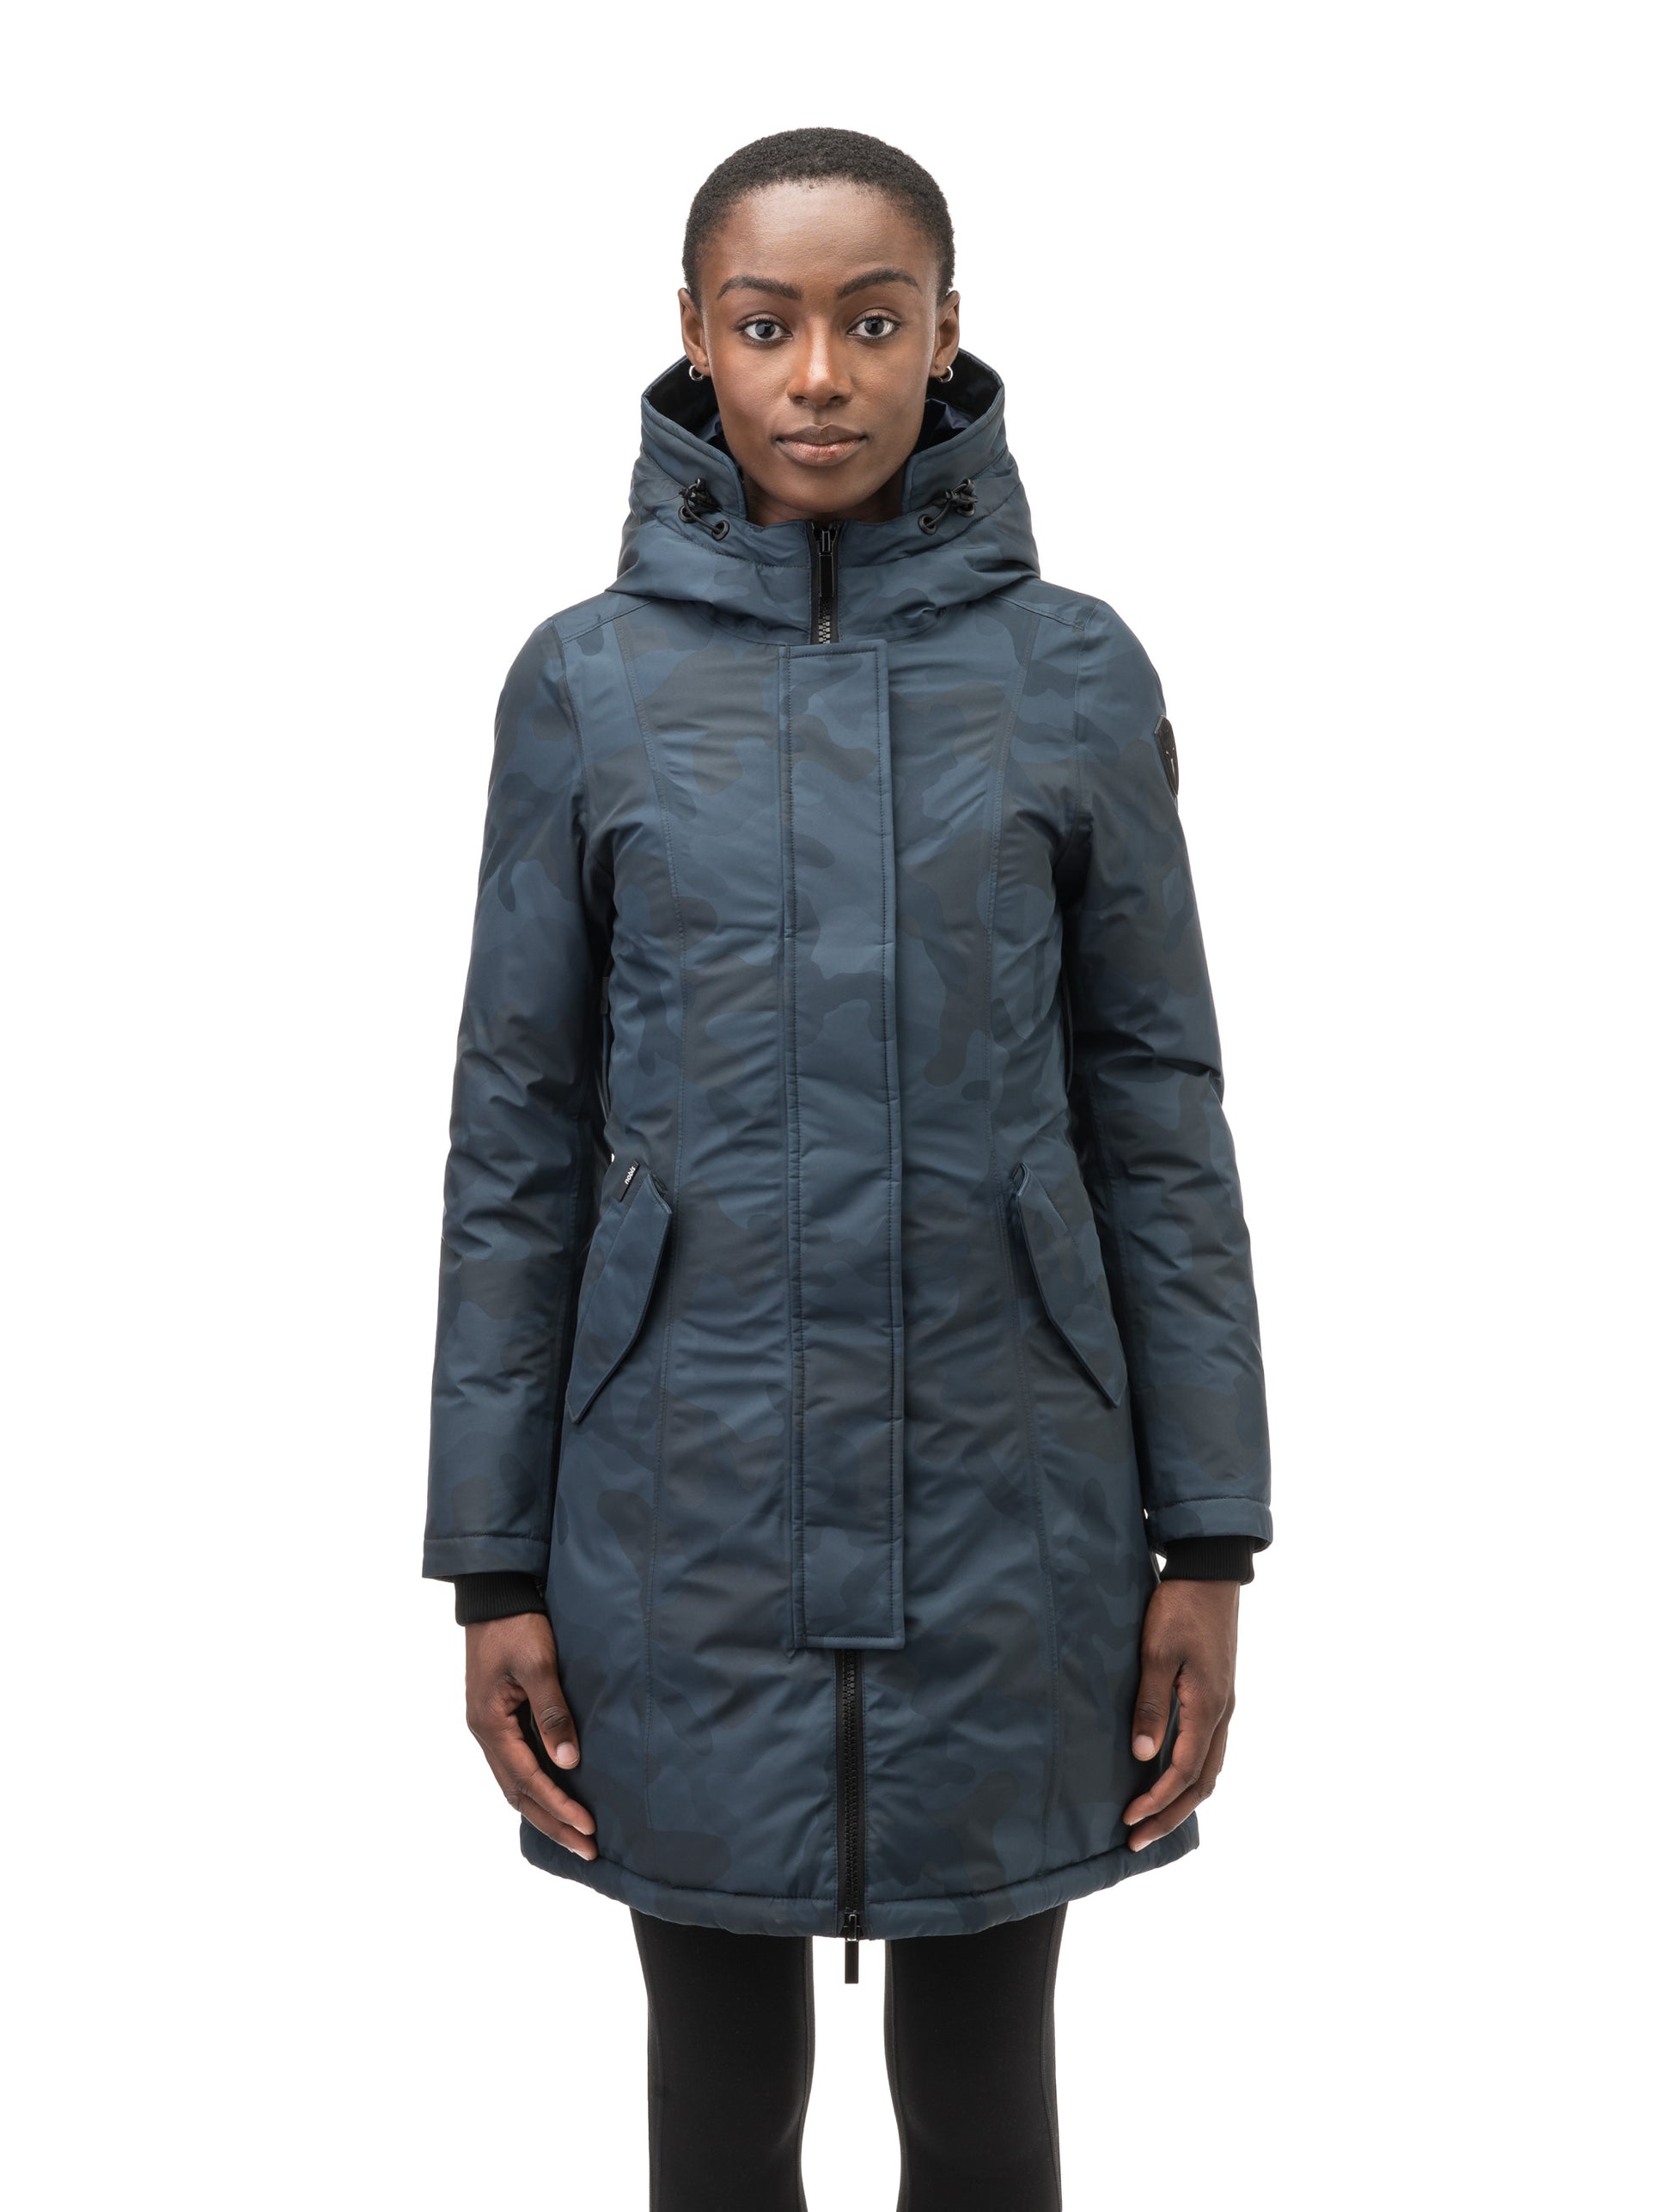 Ladies thigh length down-filled parka with non-removable hood and removable coyote fur trim in Navy Camo